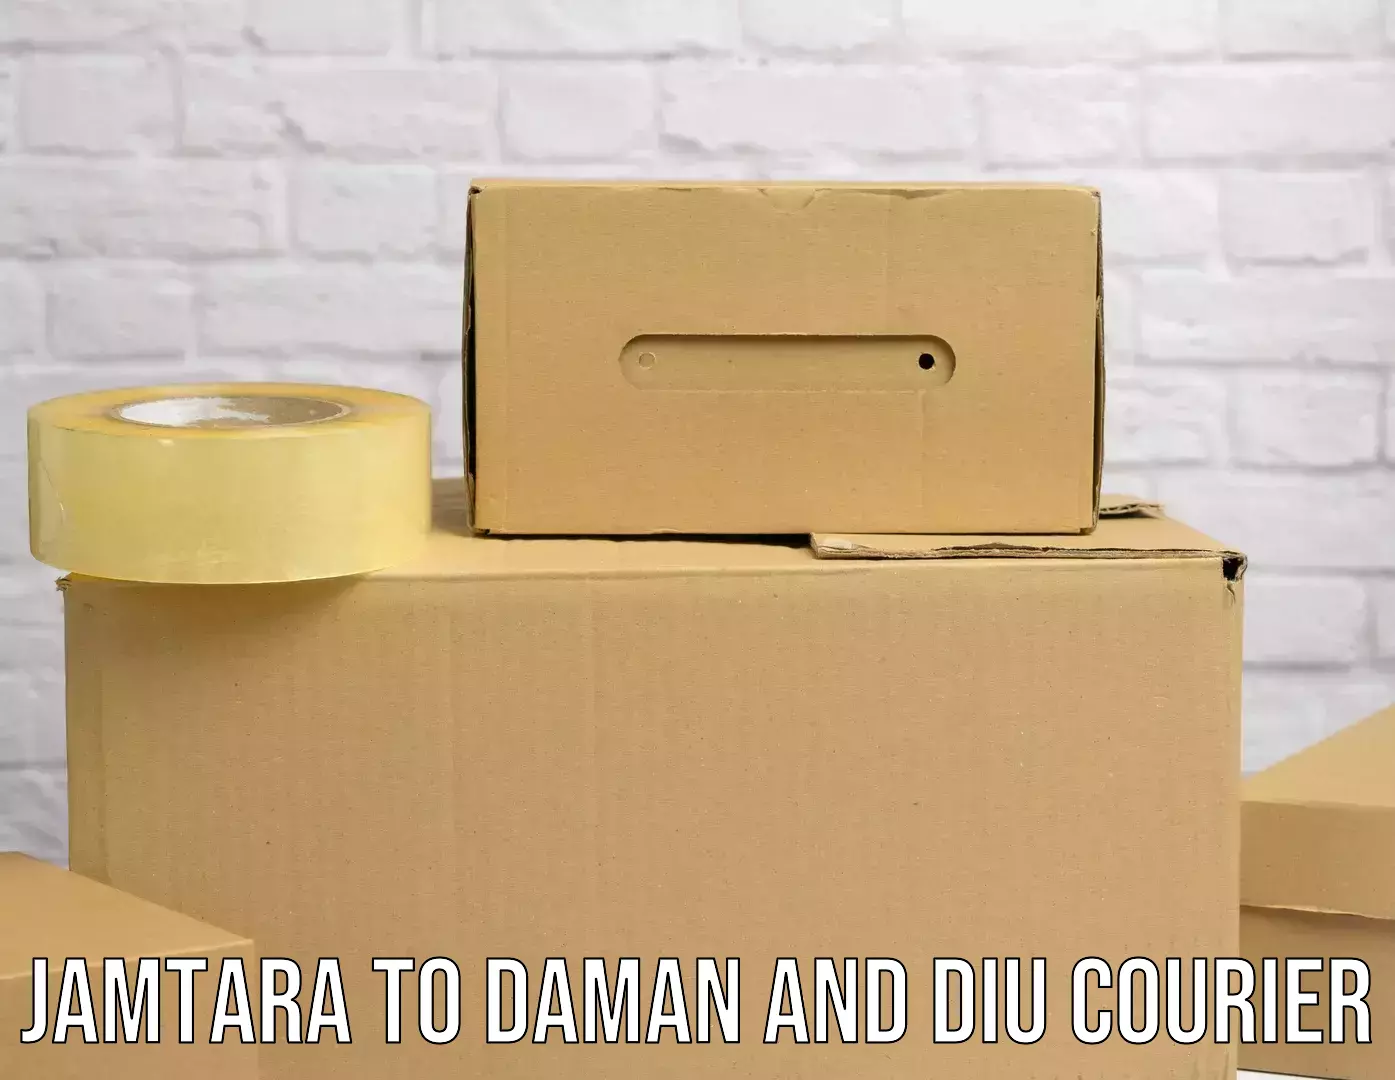 Same-day delivery options Jamtara to Daman and Diu